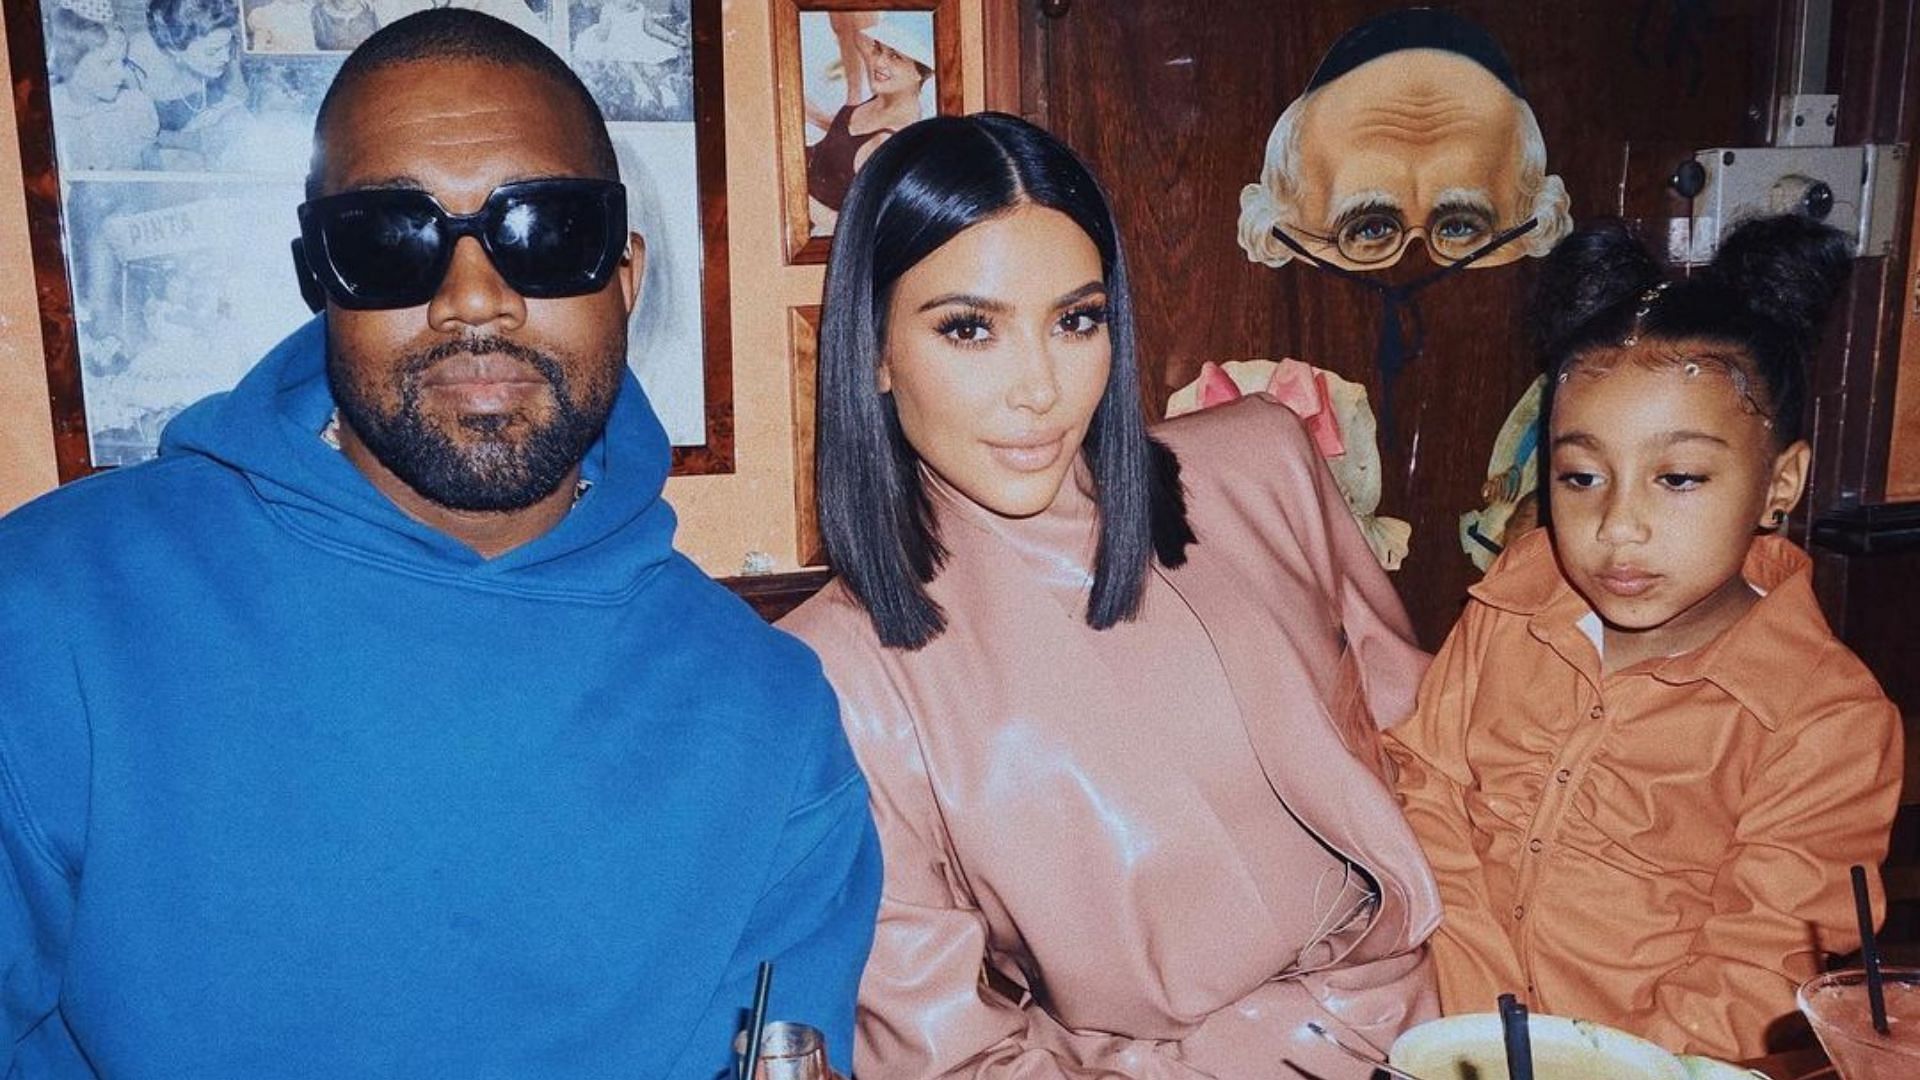 Kim opens up about issues with Kanye on The Kardashians